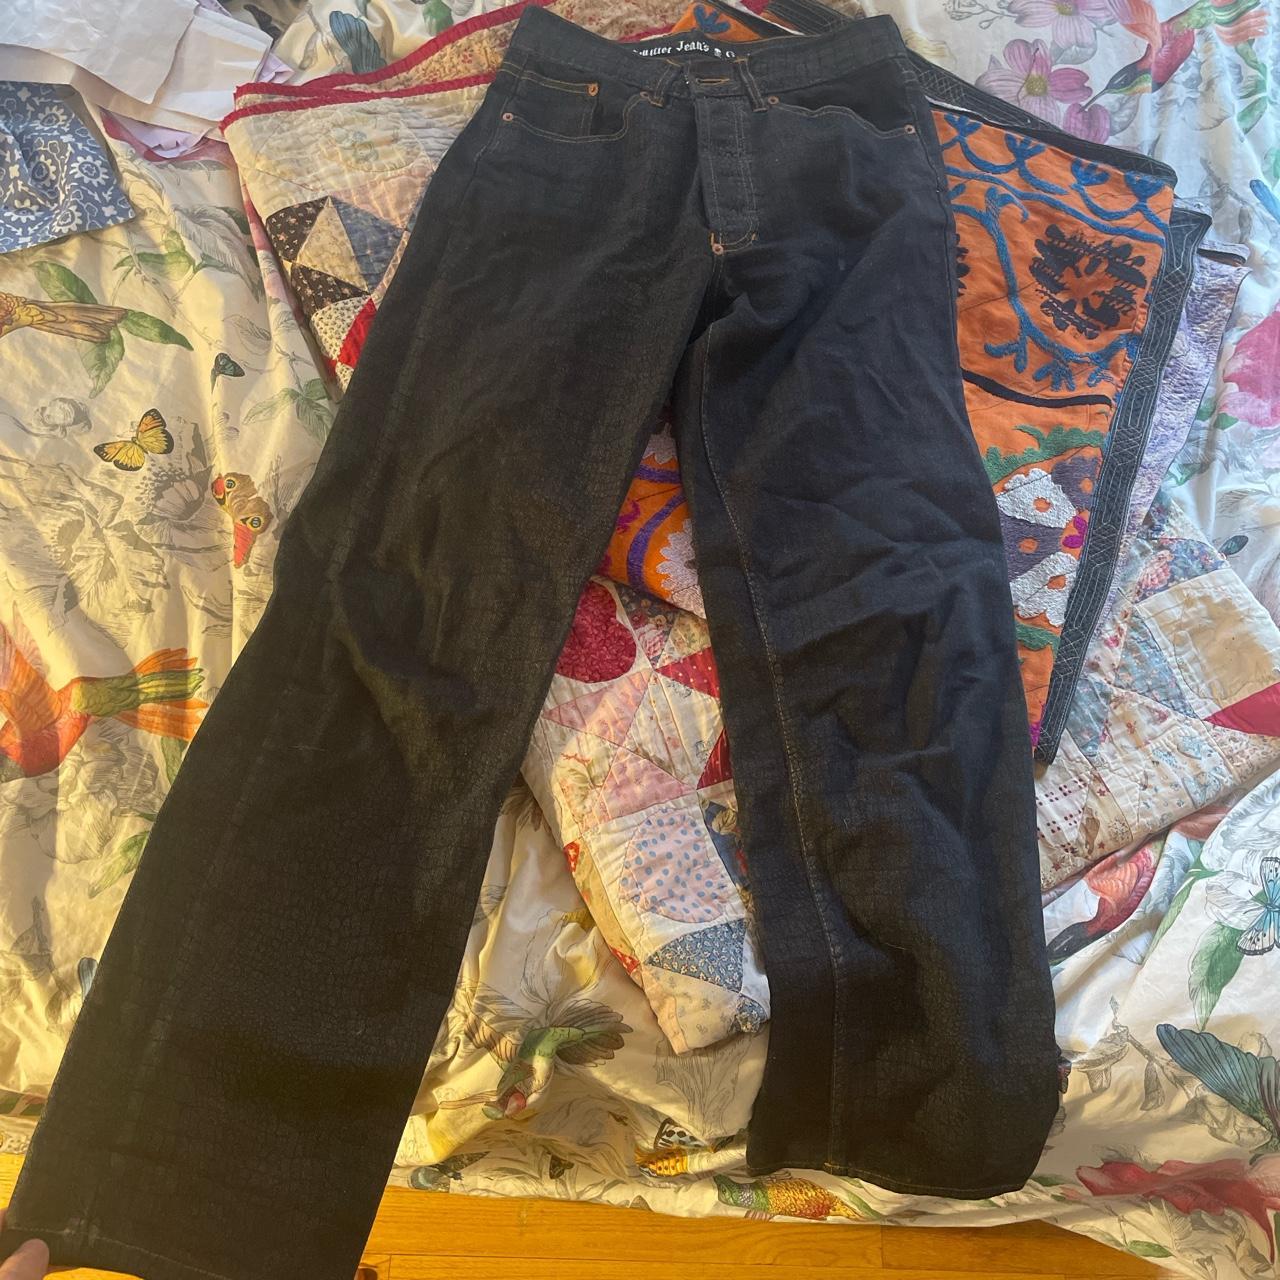 Gaultier Jeans Women's Navy and Black Jeans